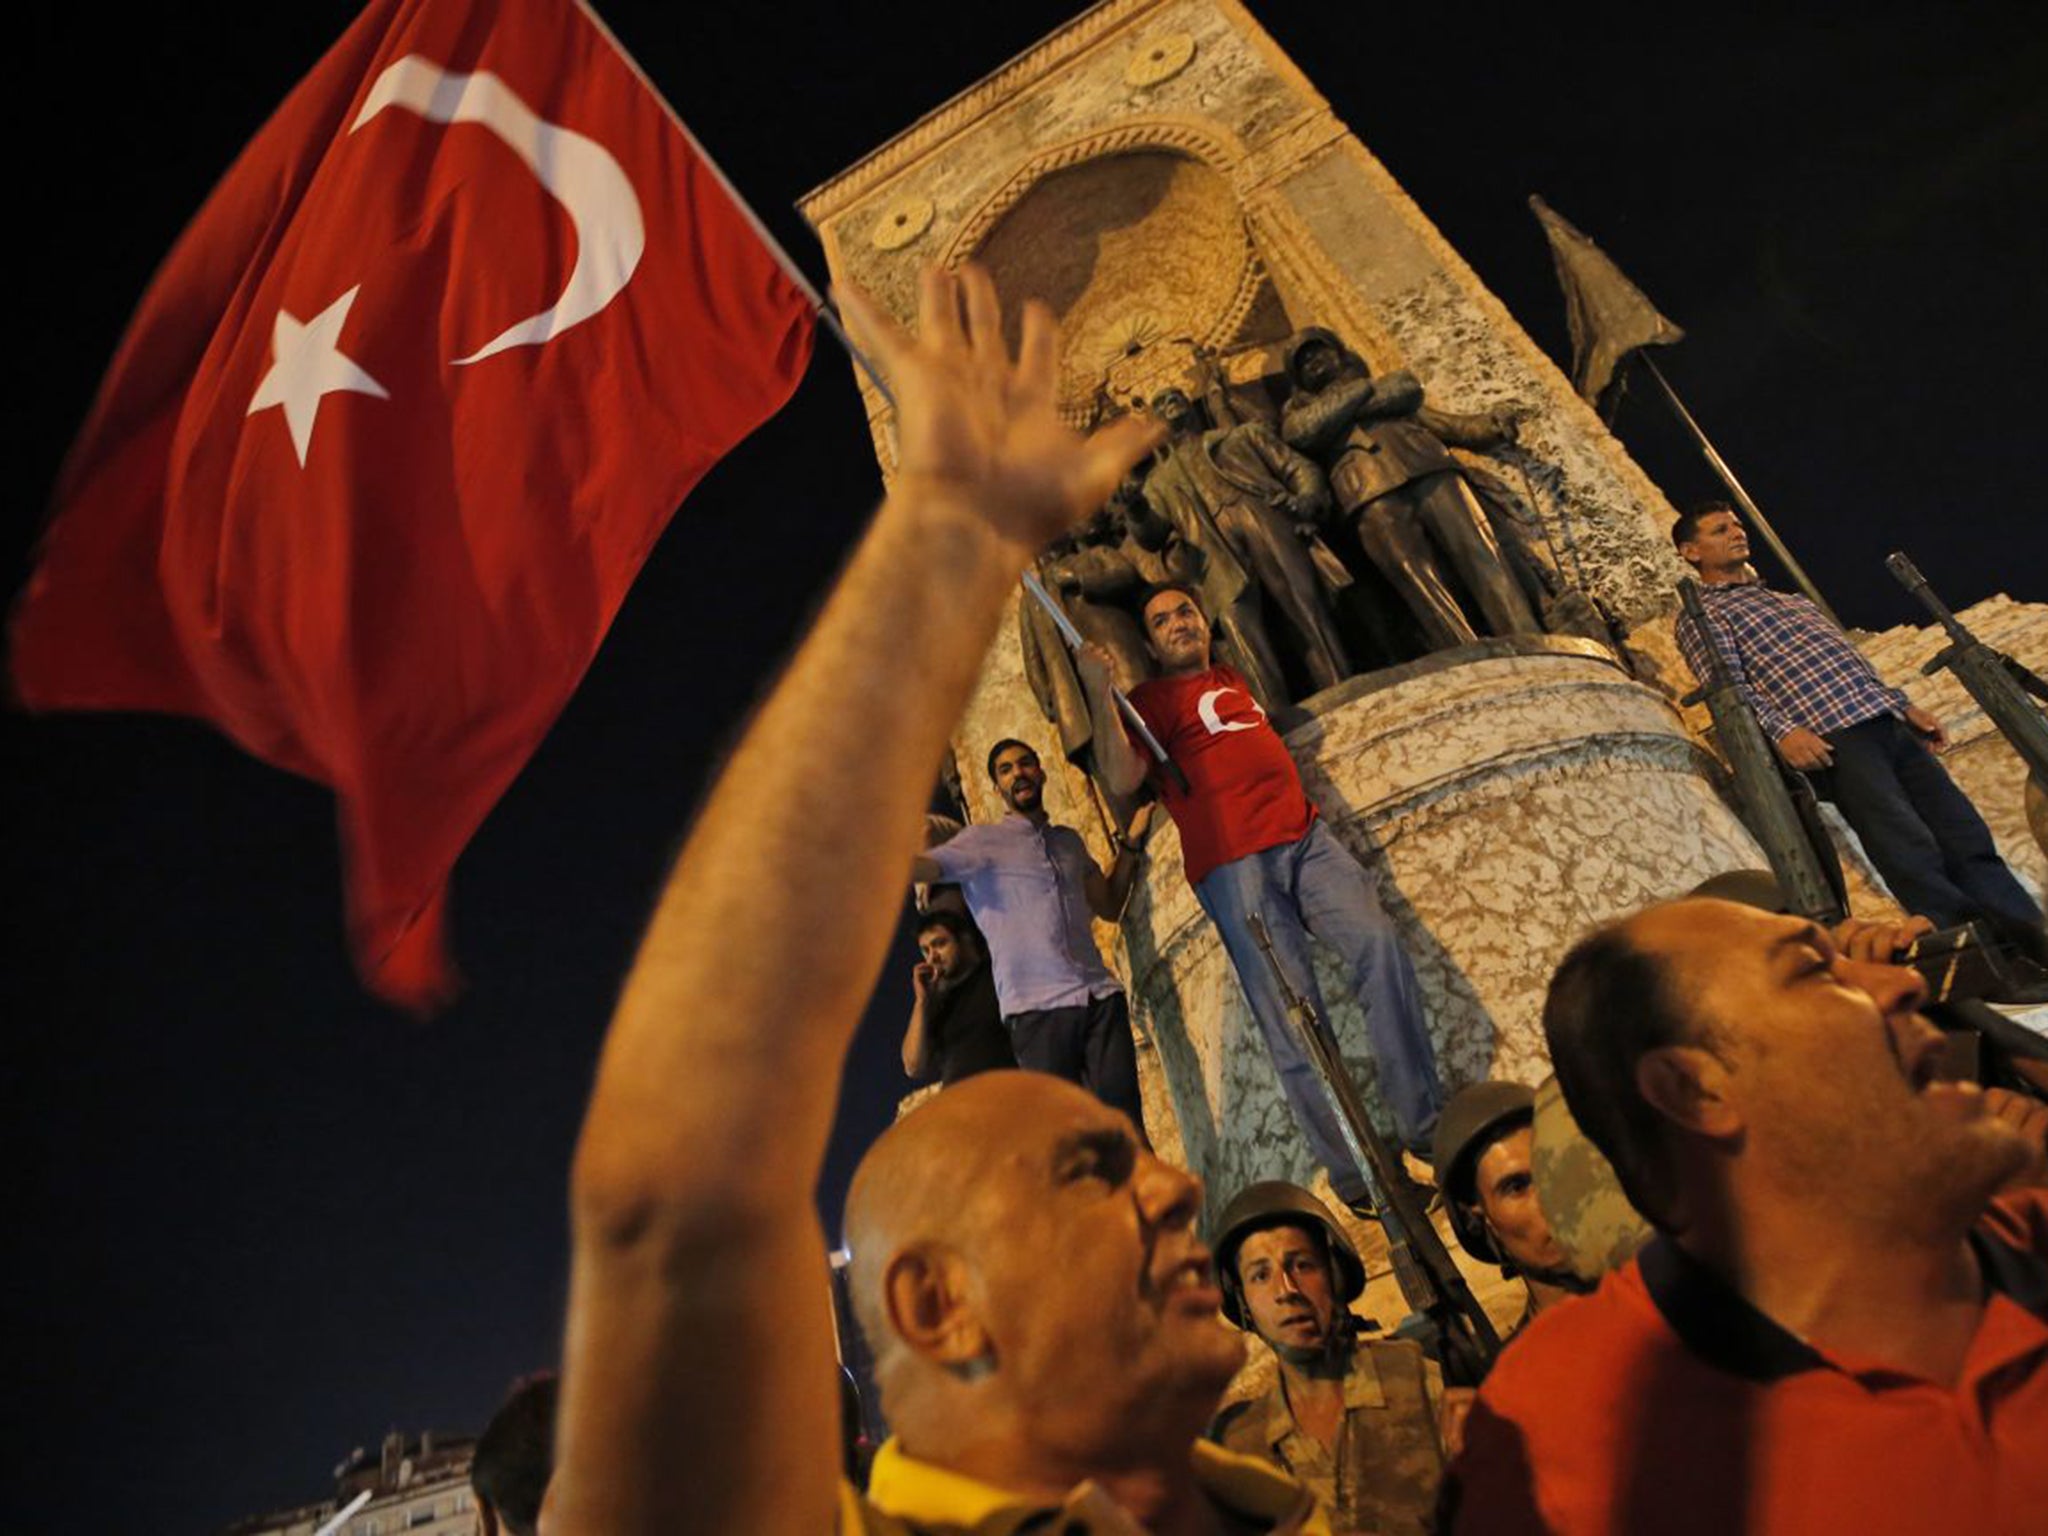 Supporters of Recep Tayyip Erdogan protest in front of soldiers in Istanbul's Taksim square